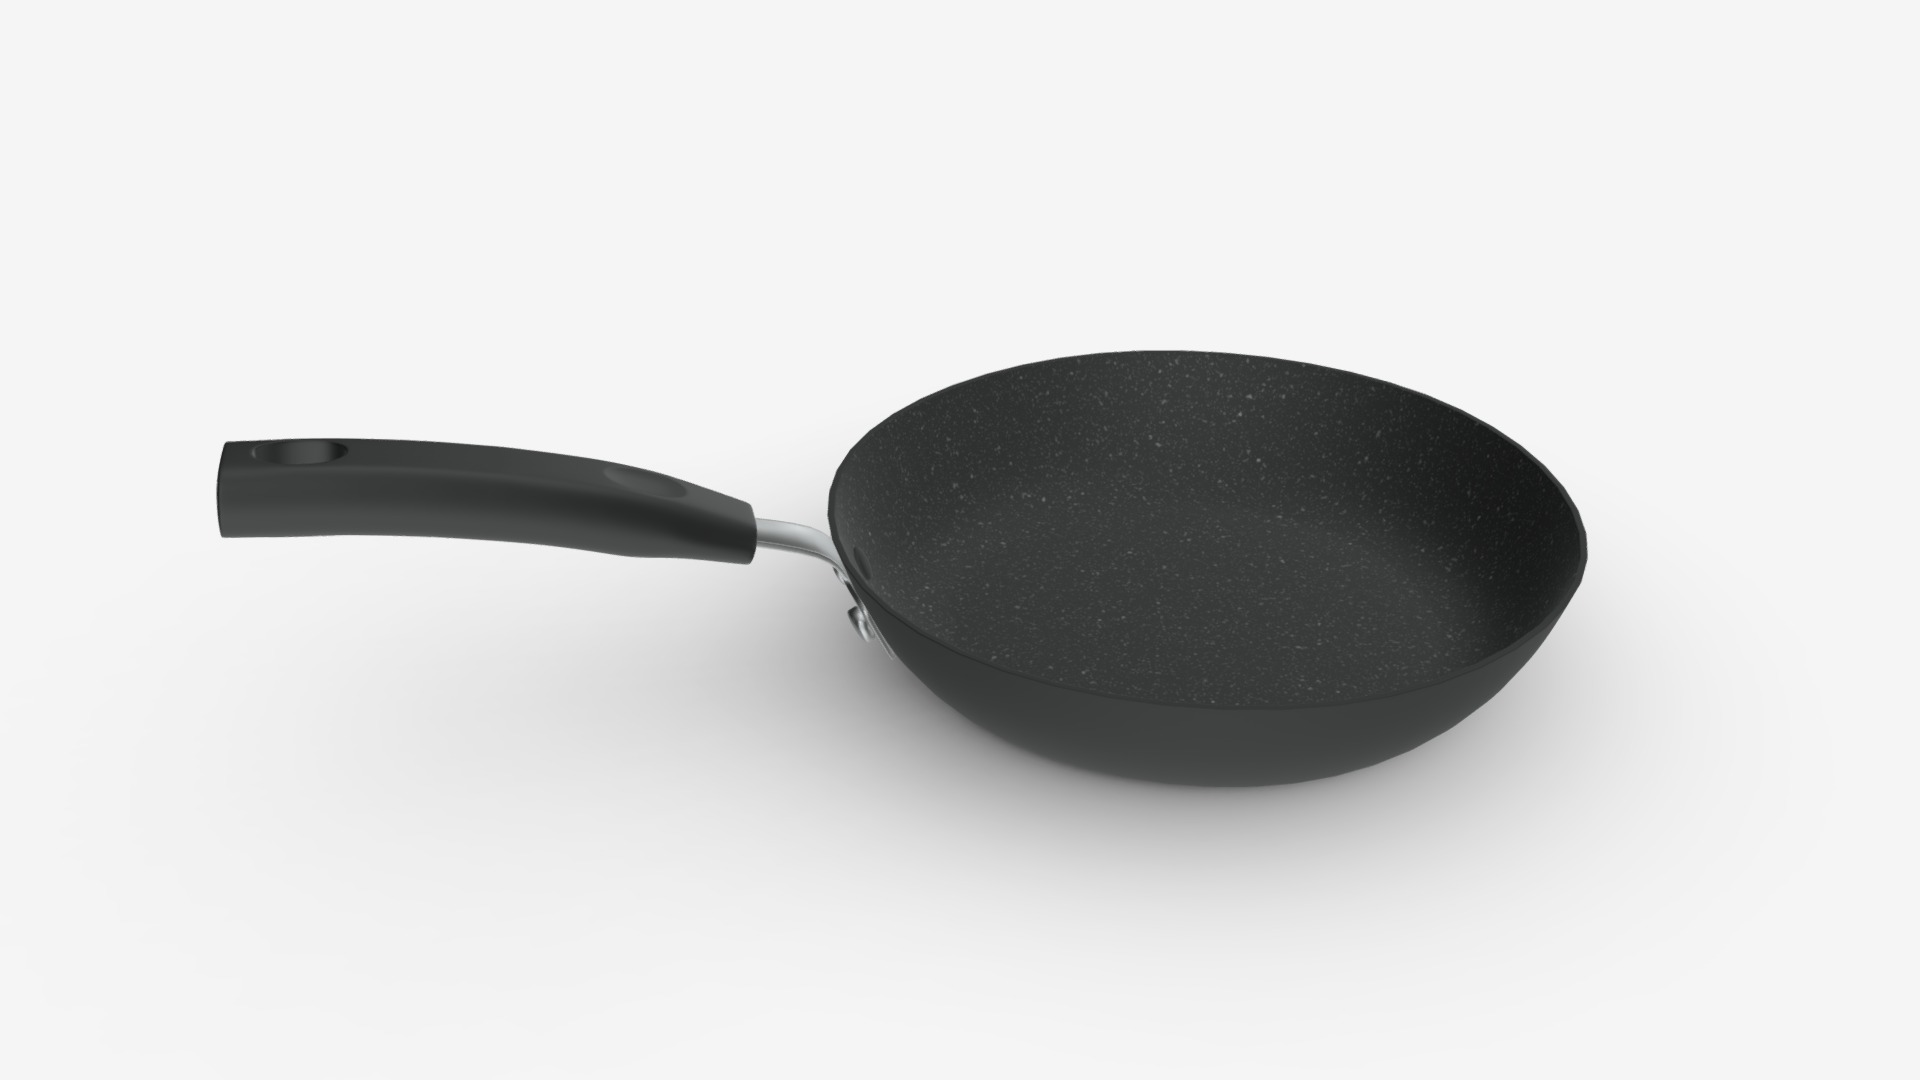 3D model kitchen pan 22cm - This is a 3D model of the kitchen pan 22cm. The 3D model is about a black frying pan.